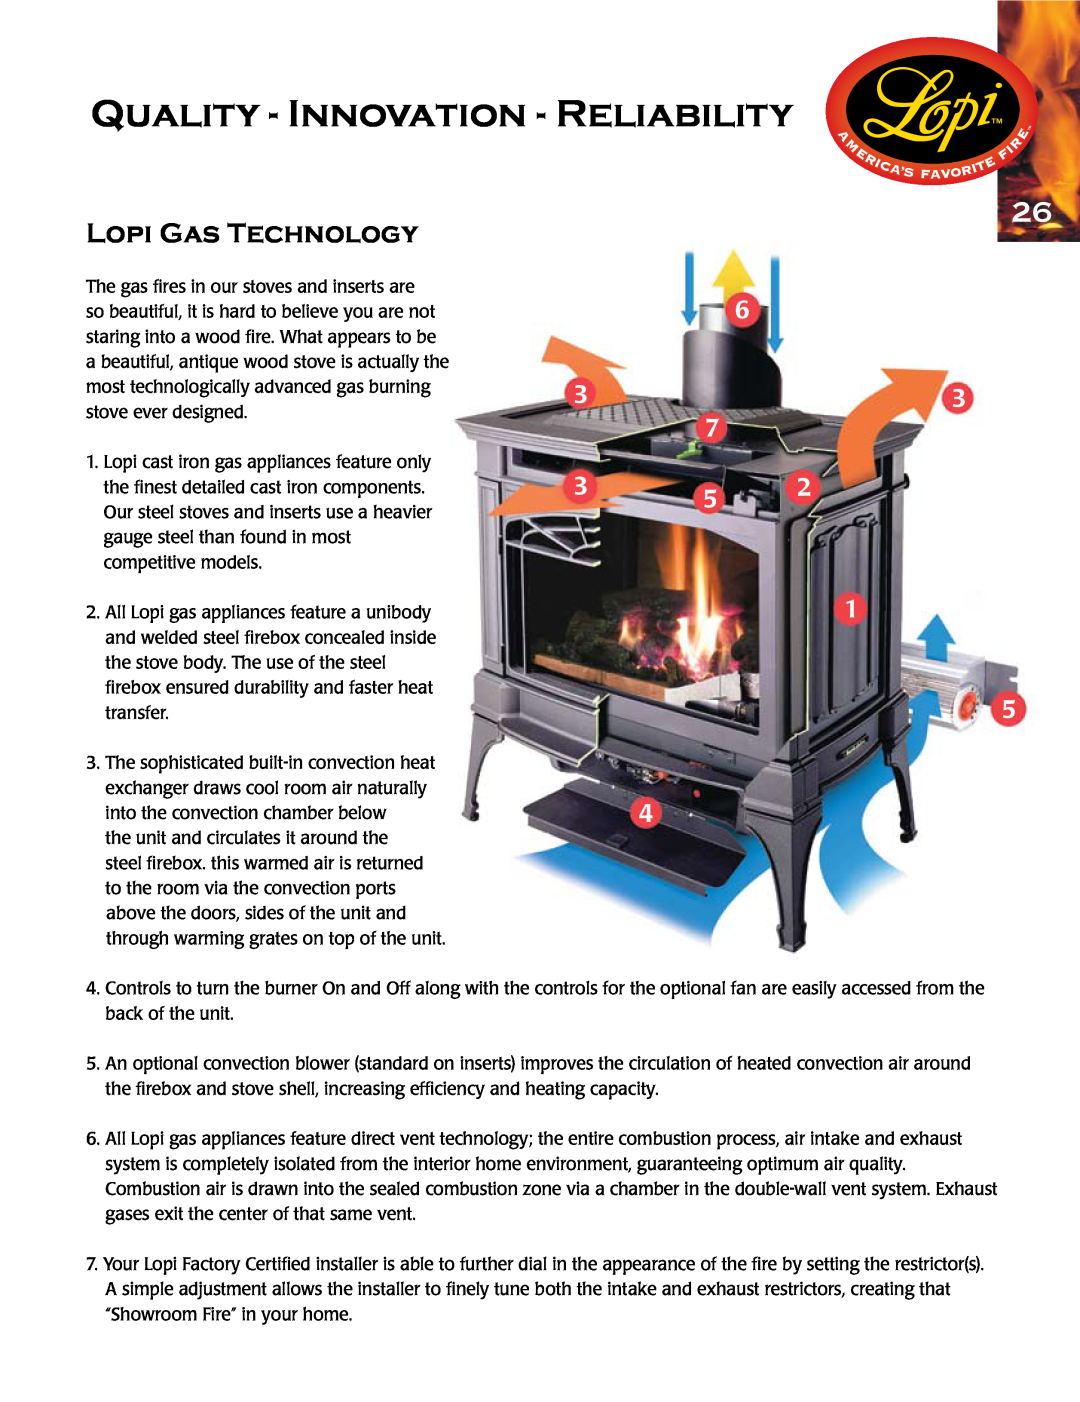 Lopi Gas Stove And Fireplace manual Quality - Innovation - Reliability, Lopi Gas Technology, 7 3 5 1 5 4 